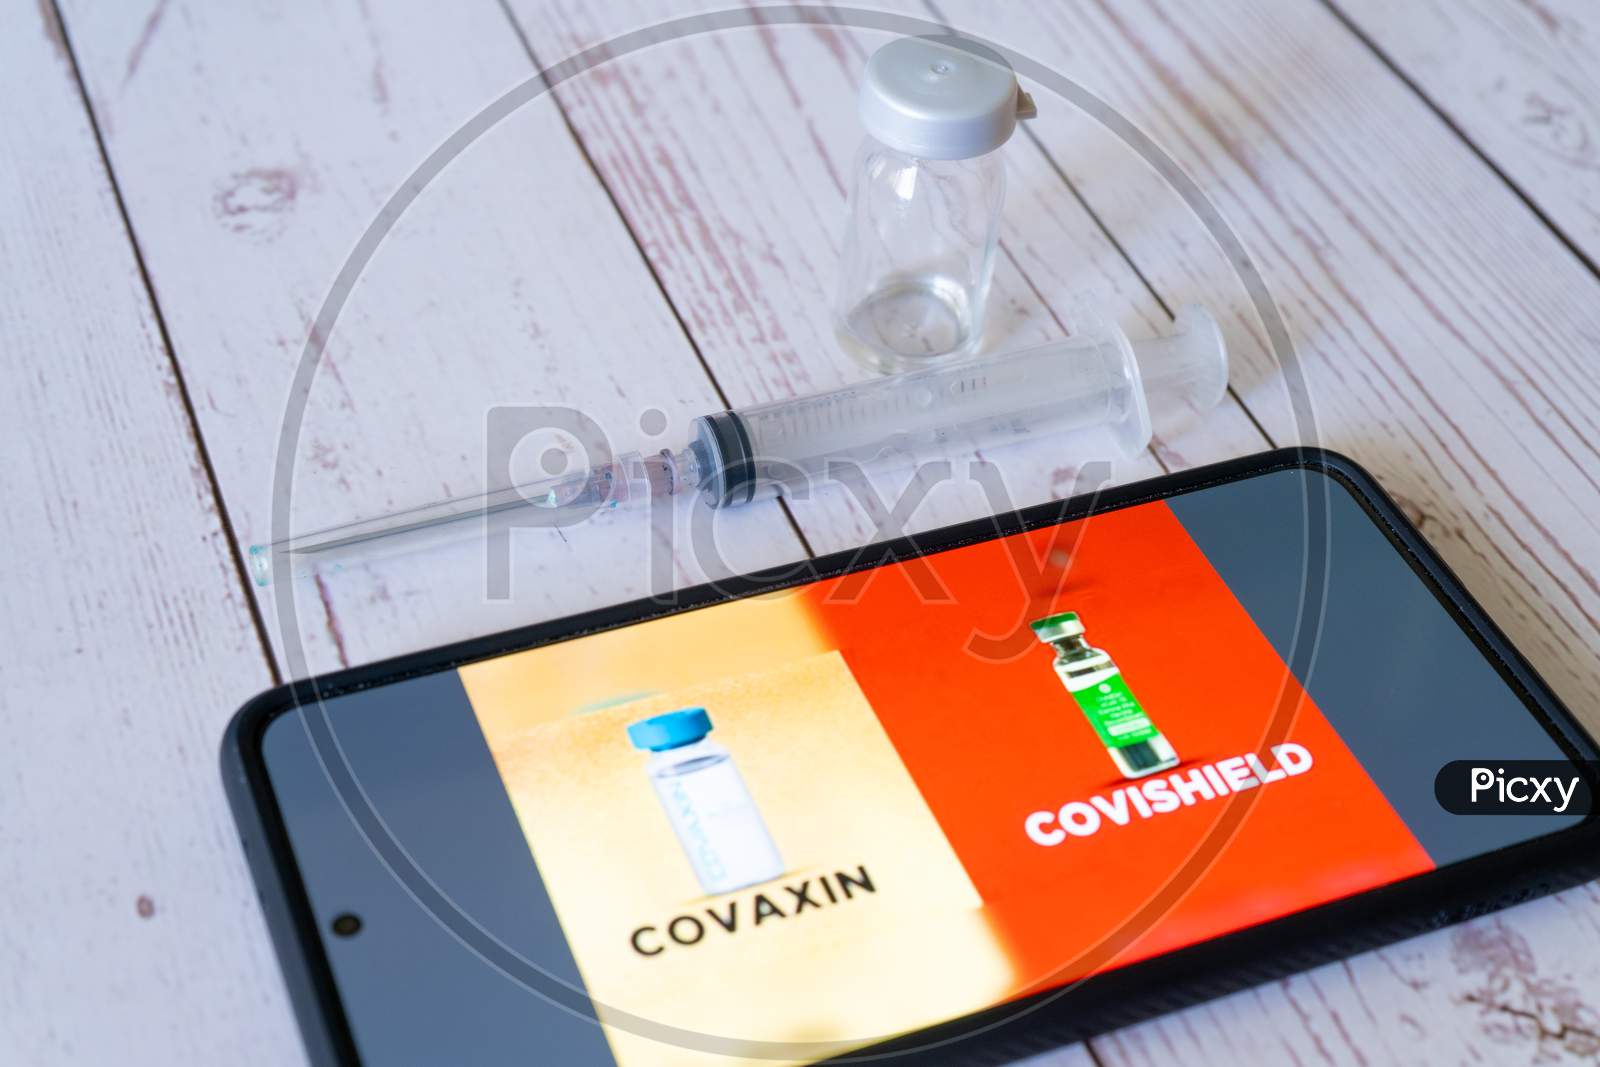 Mobile Phone Showing The Covid 19 Coronavirus Vaccines Covishield Covaxin For Selection In The Co-Win App With Syringe And Vial On The Side